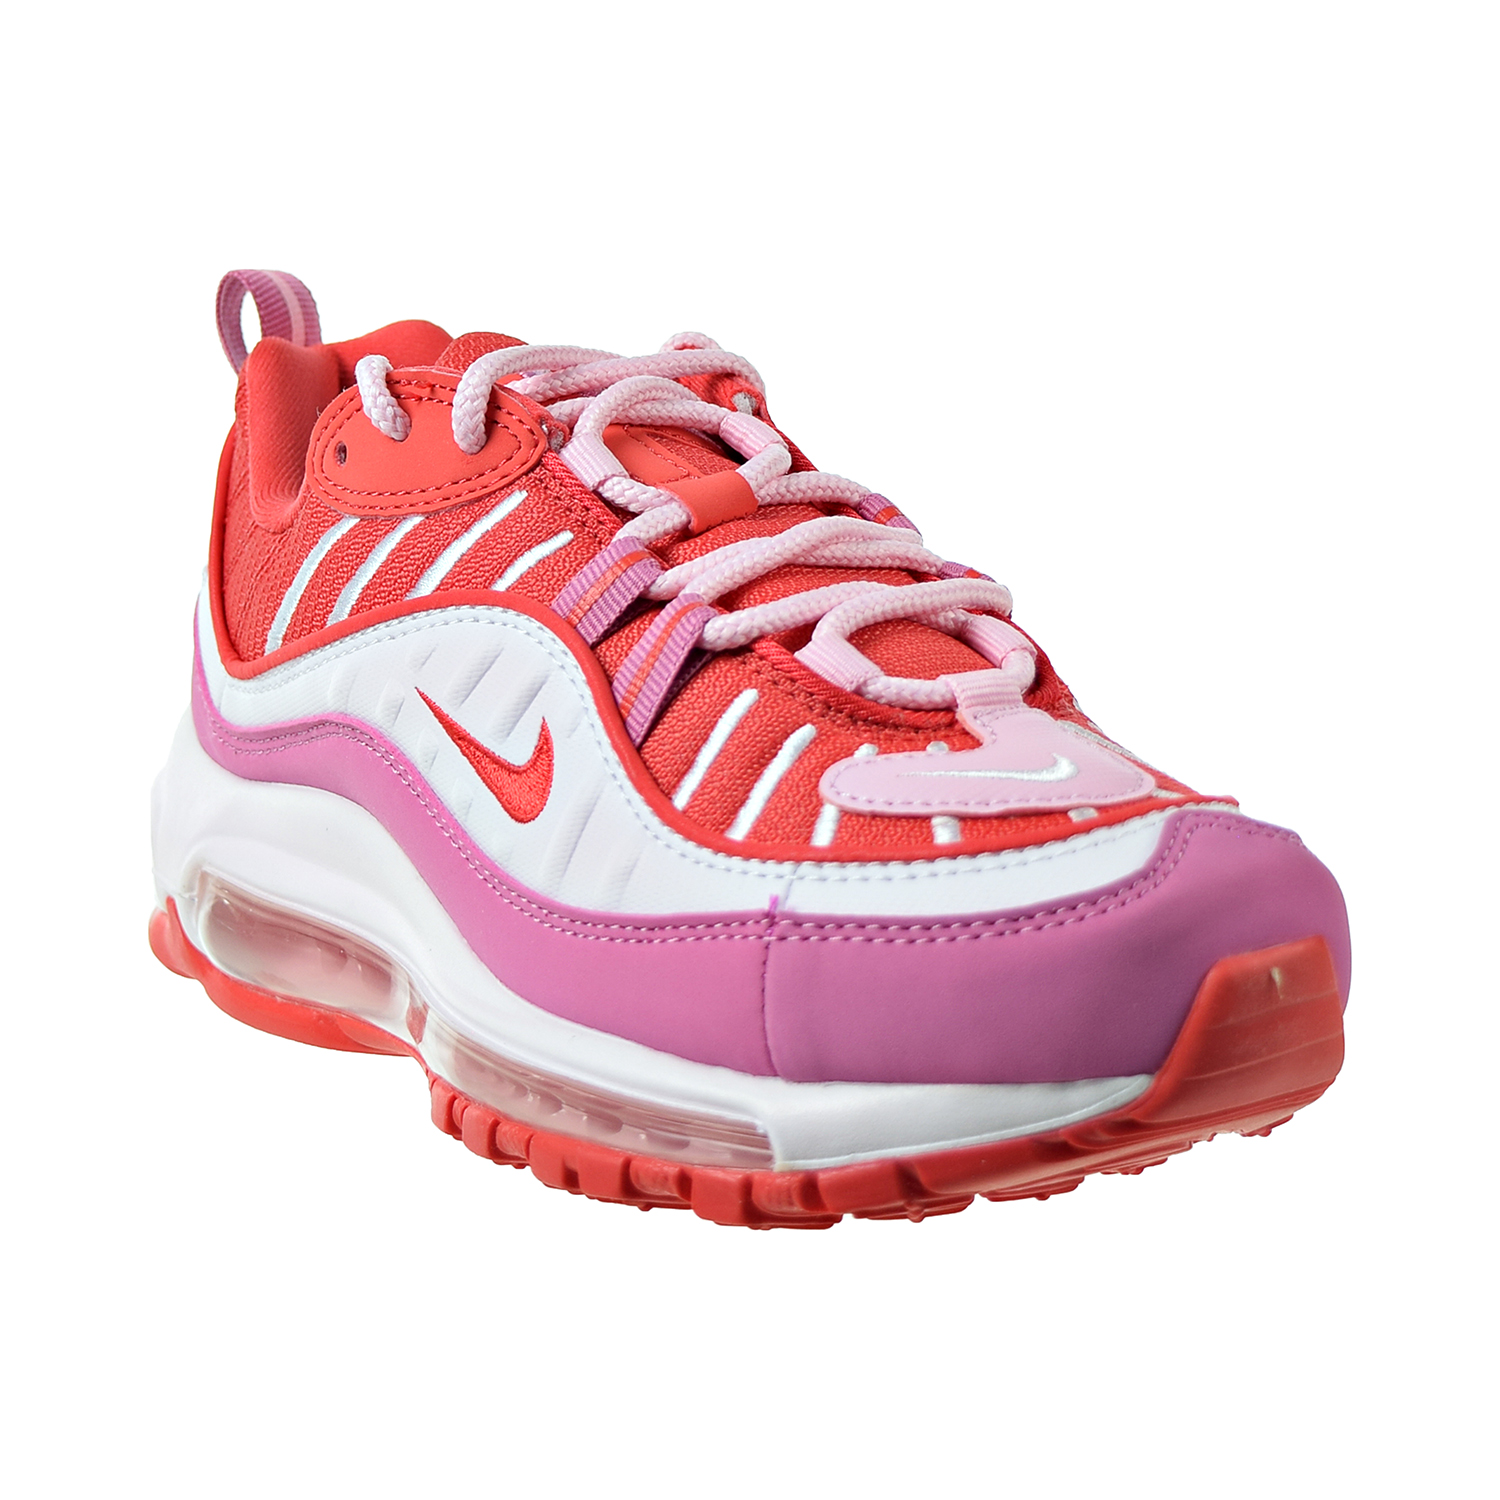 nike air max 98 red and pink